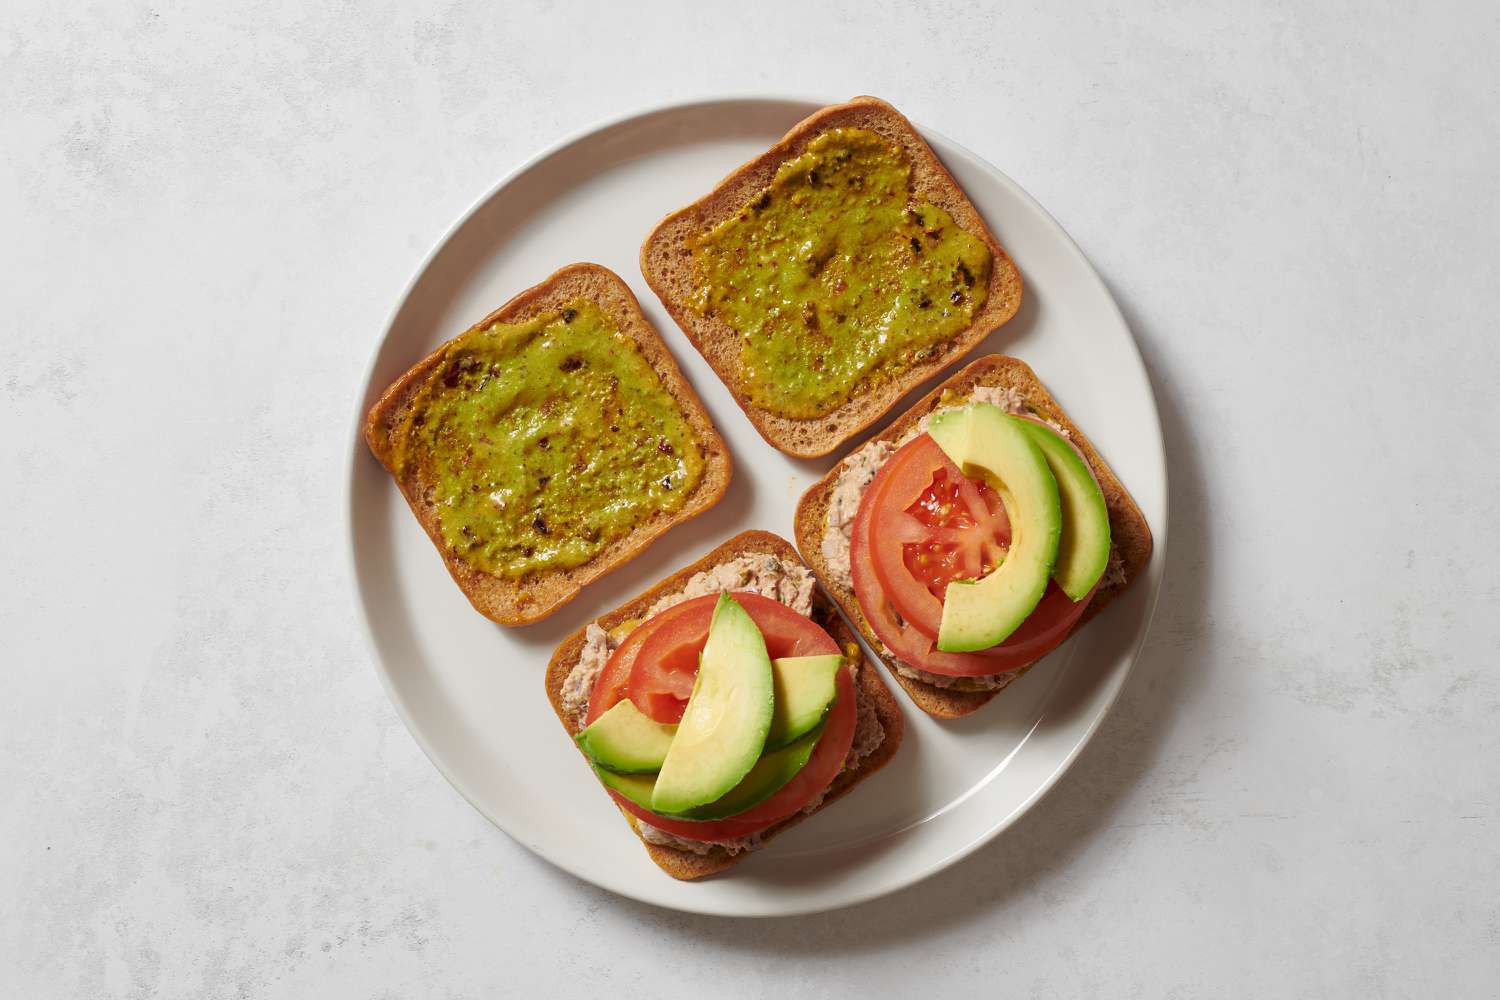 Two slices of bread topped with whipped tuna mixture, tomatoes, and avocado